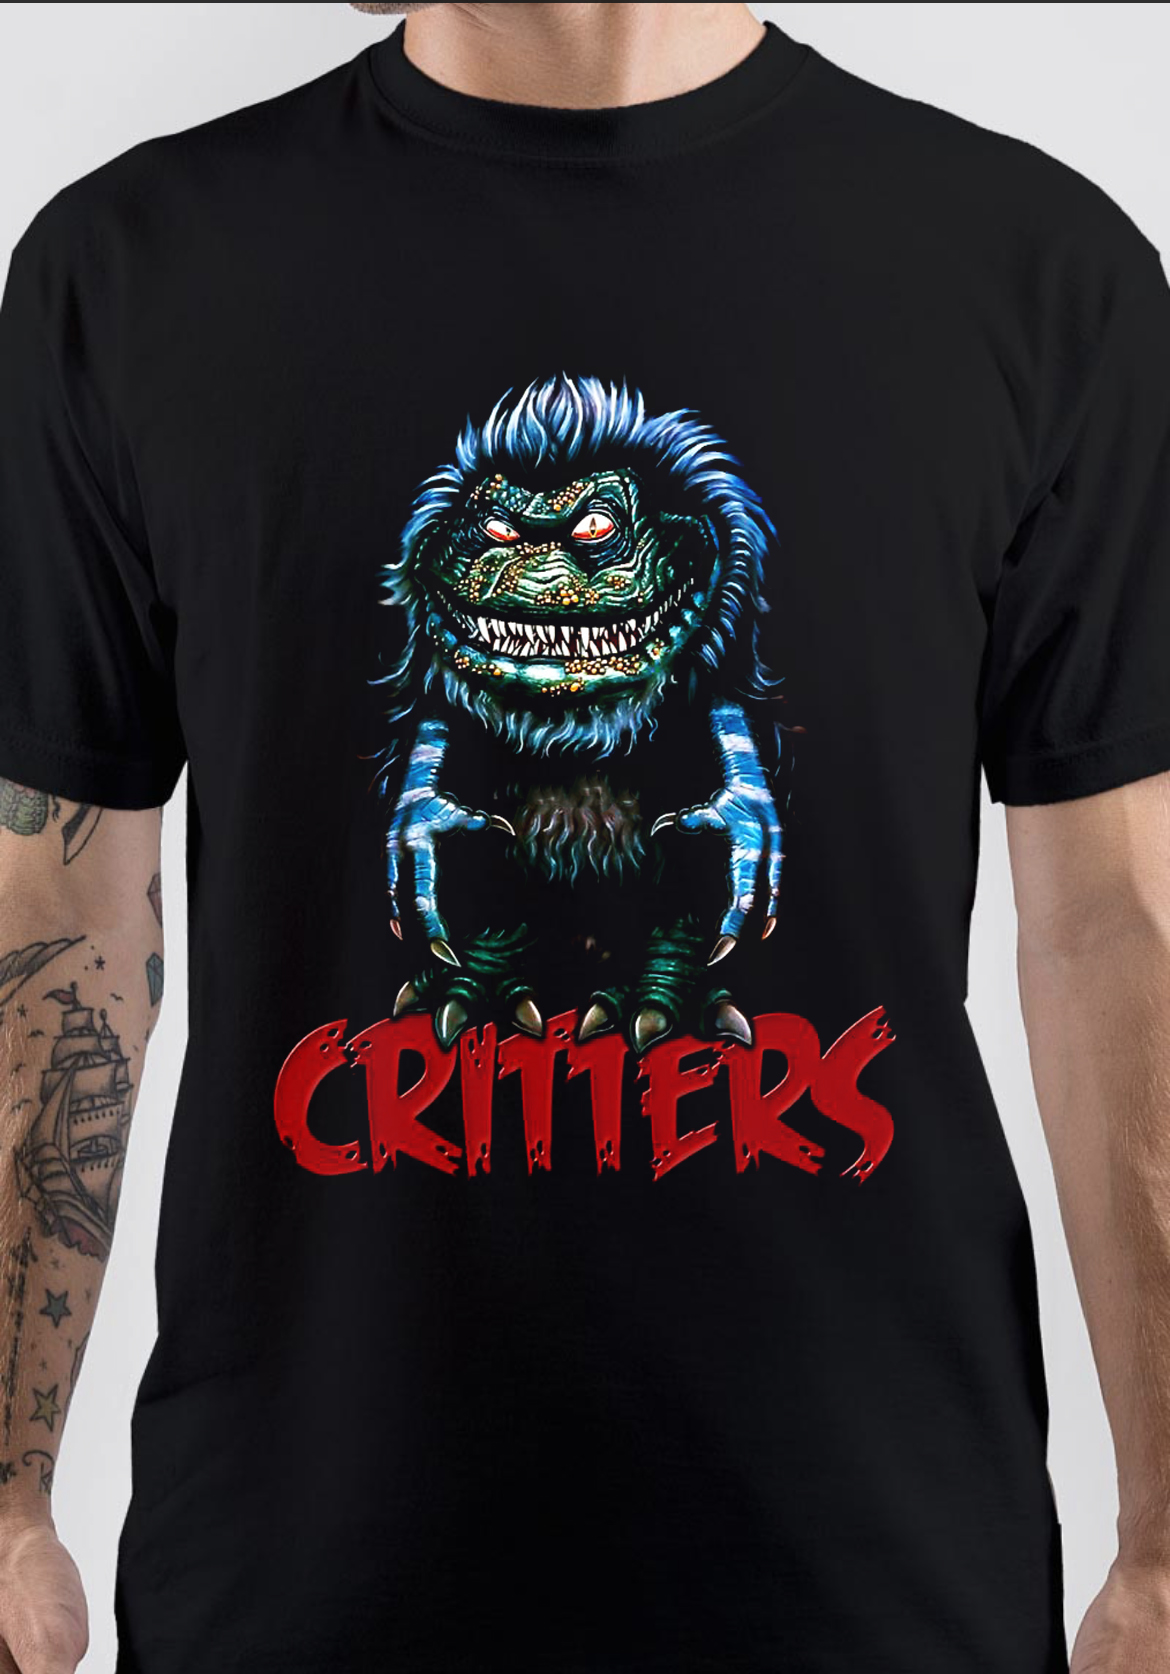 Critters T-Shirt And Merchandise